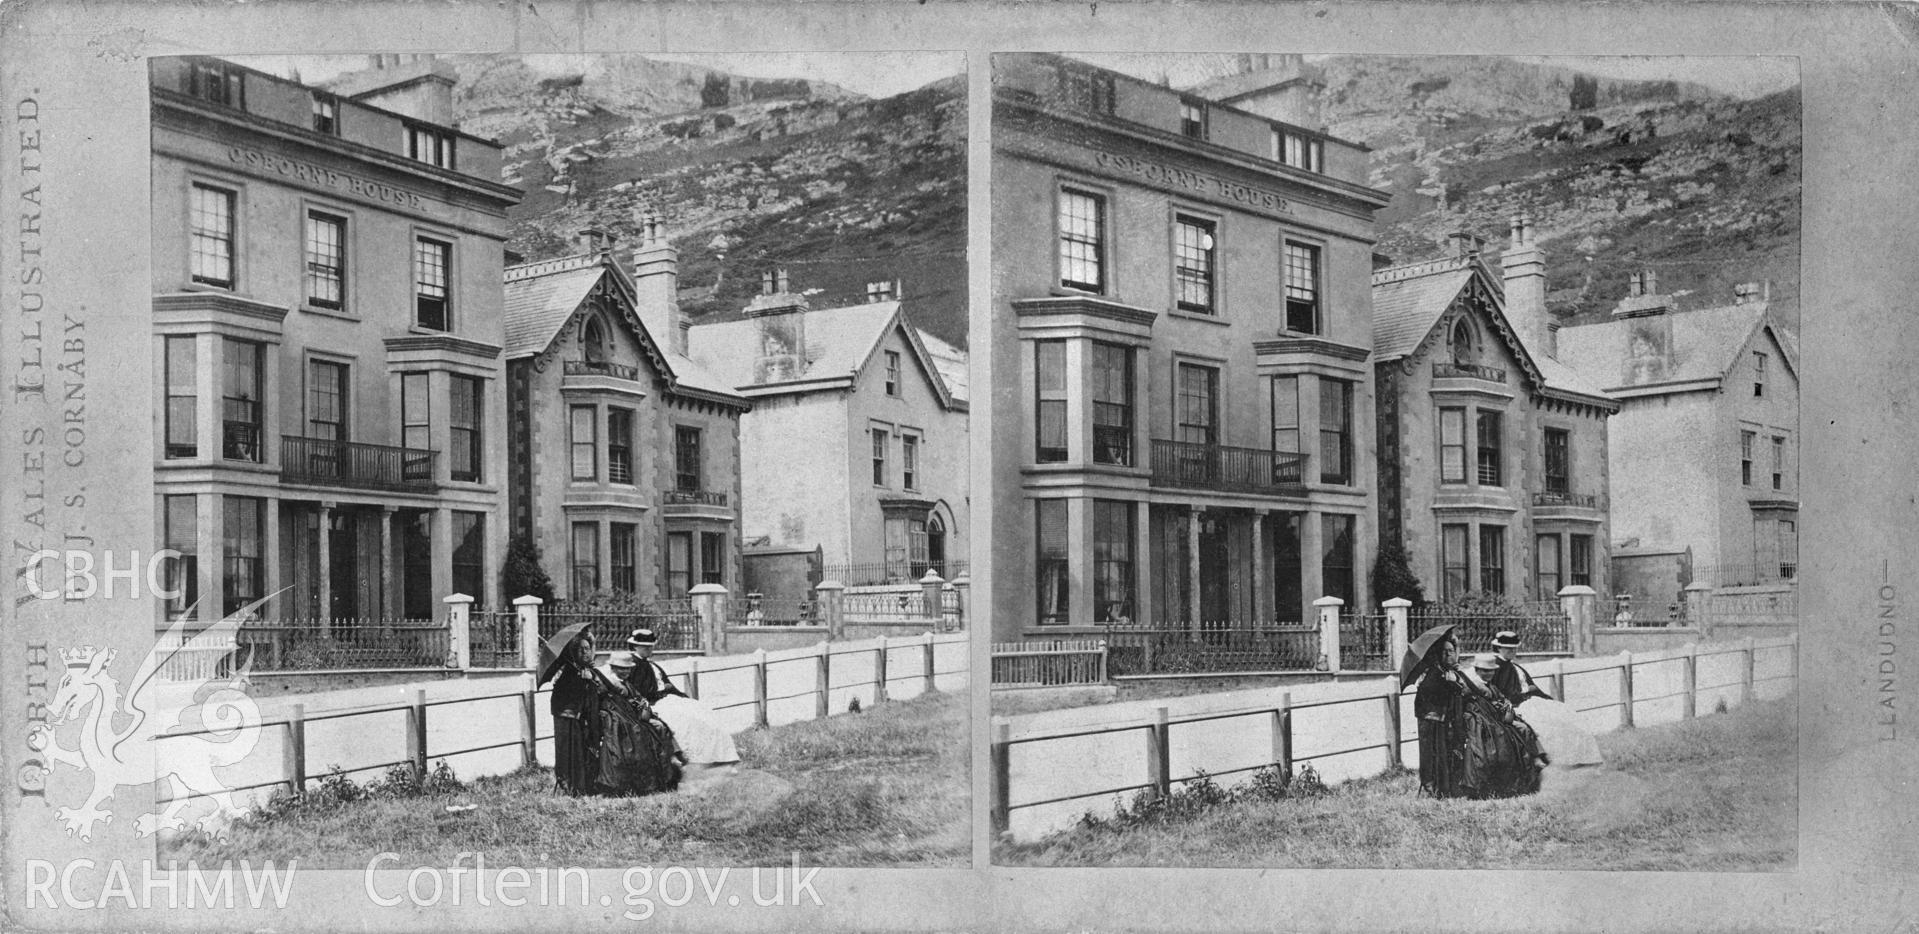 View showing street view in Llandudno, including the Osborne Hotel, undated.